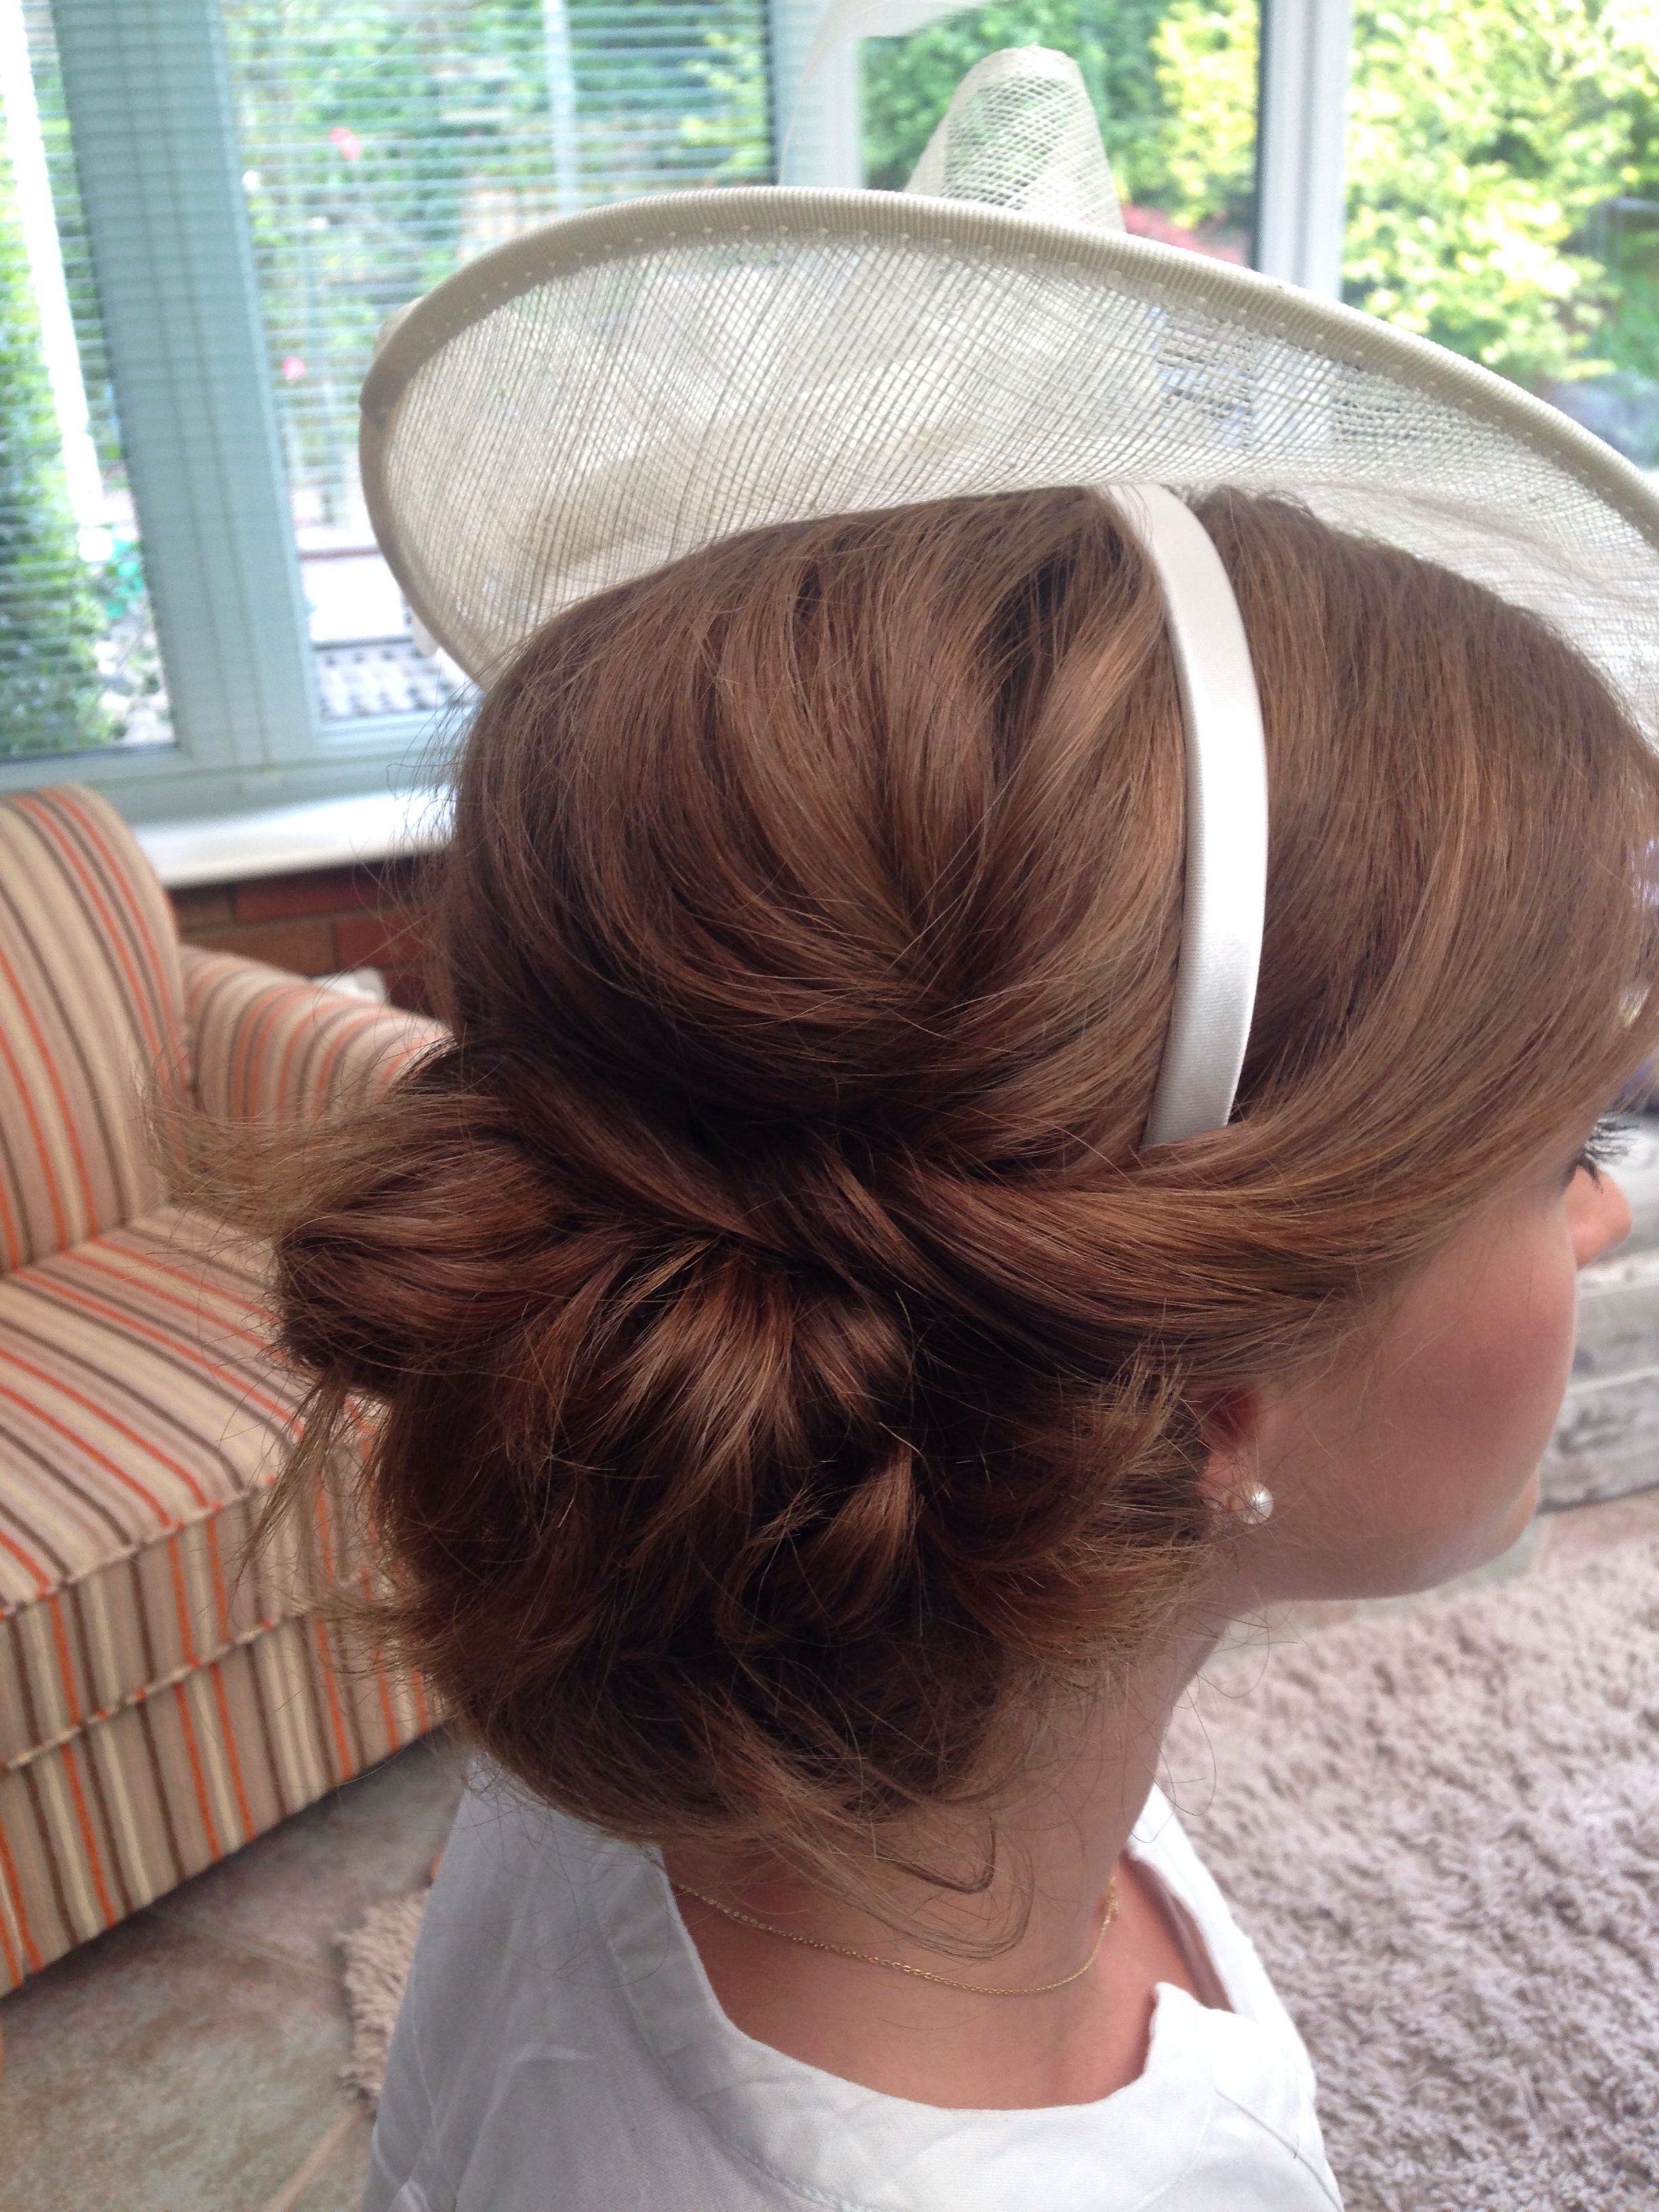 Most Recent Twisted Side Updo Hairstyles For Wedding Within Messy Low Bun Sat Slightly To The Side – Twisting Sections Of Hair (View 4 of 20)